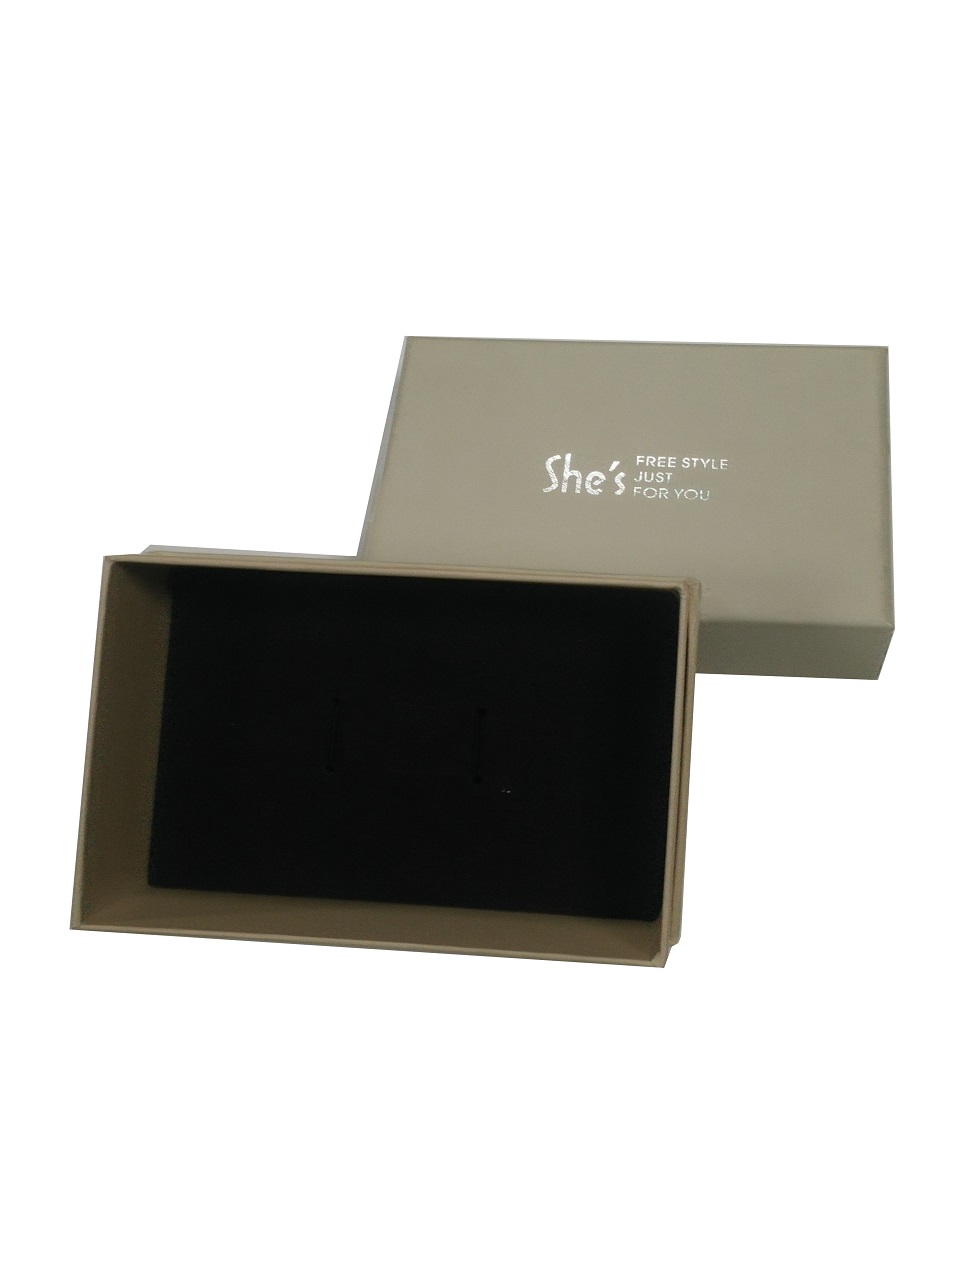 Foam lining gift paper packing box